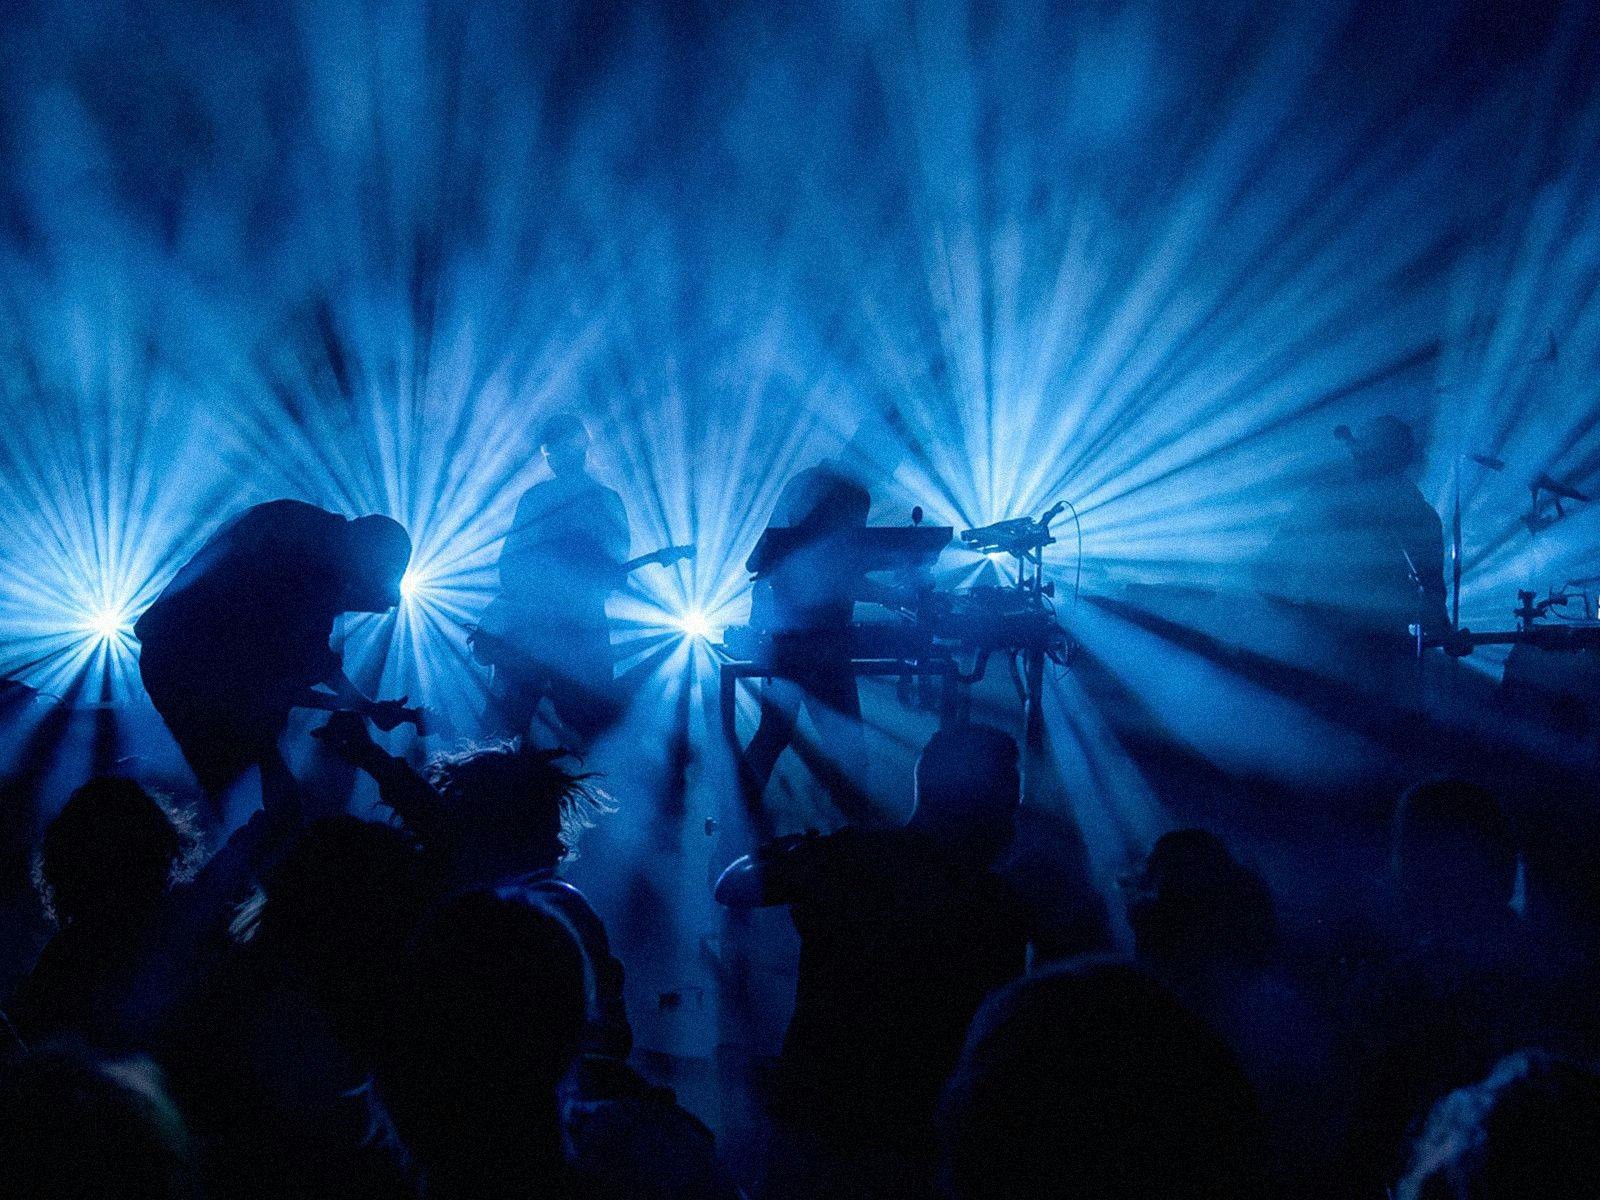 Silhouetted by dazzling blue lights, Trentemøller performs on stage with guitars and keyboards.